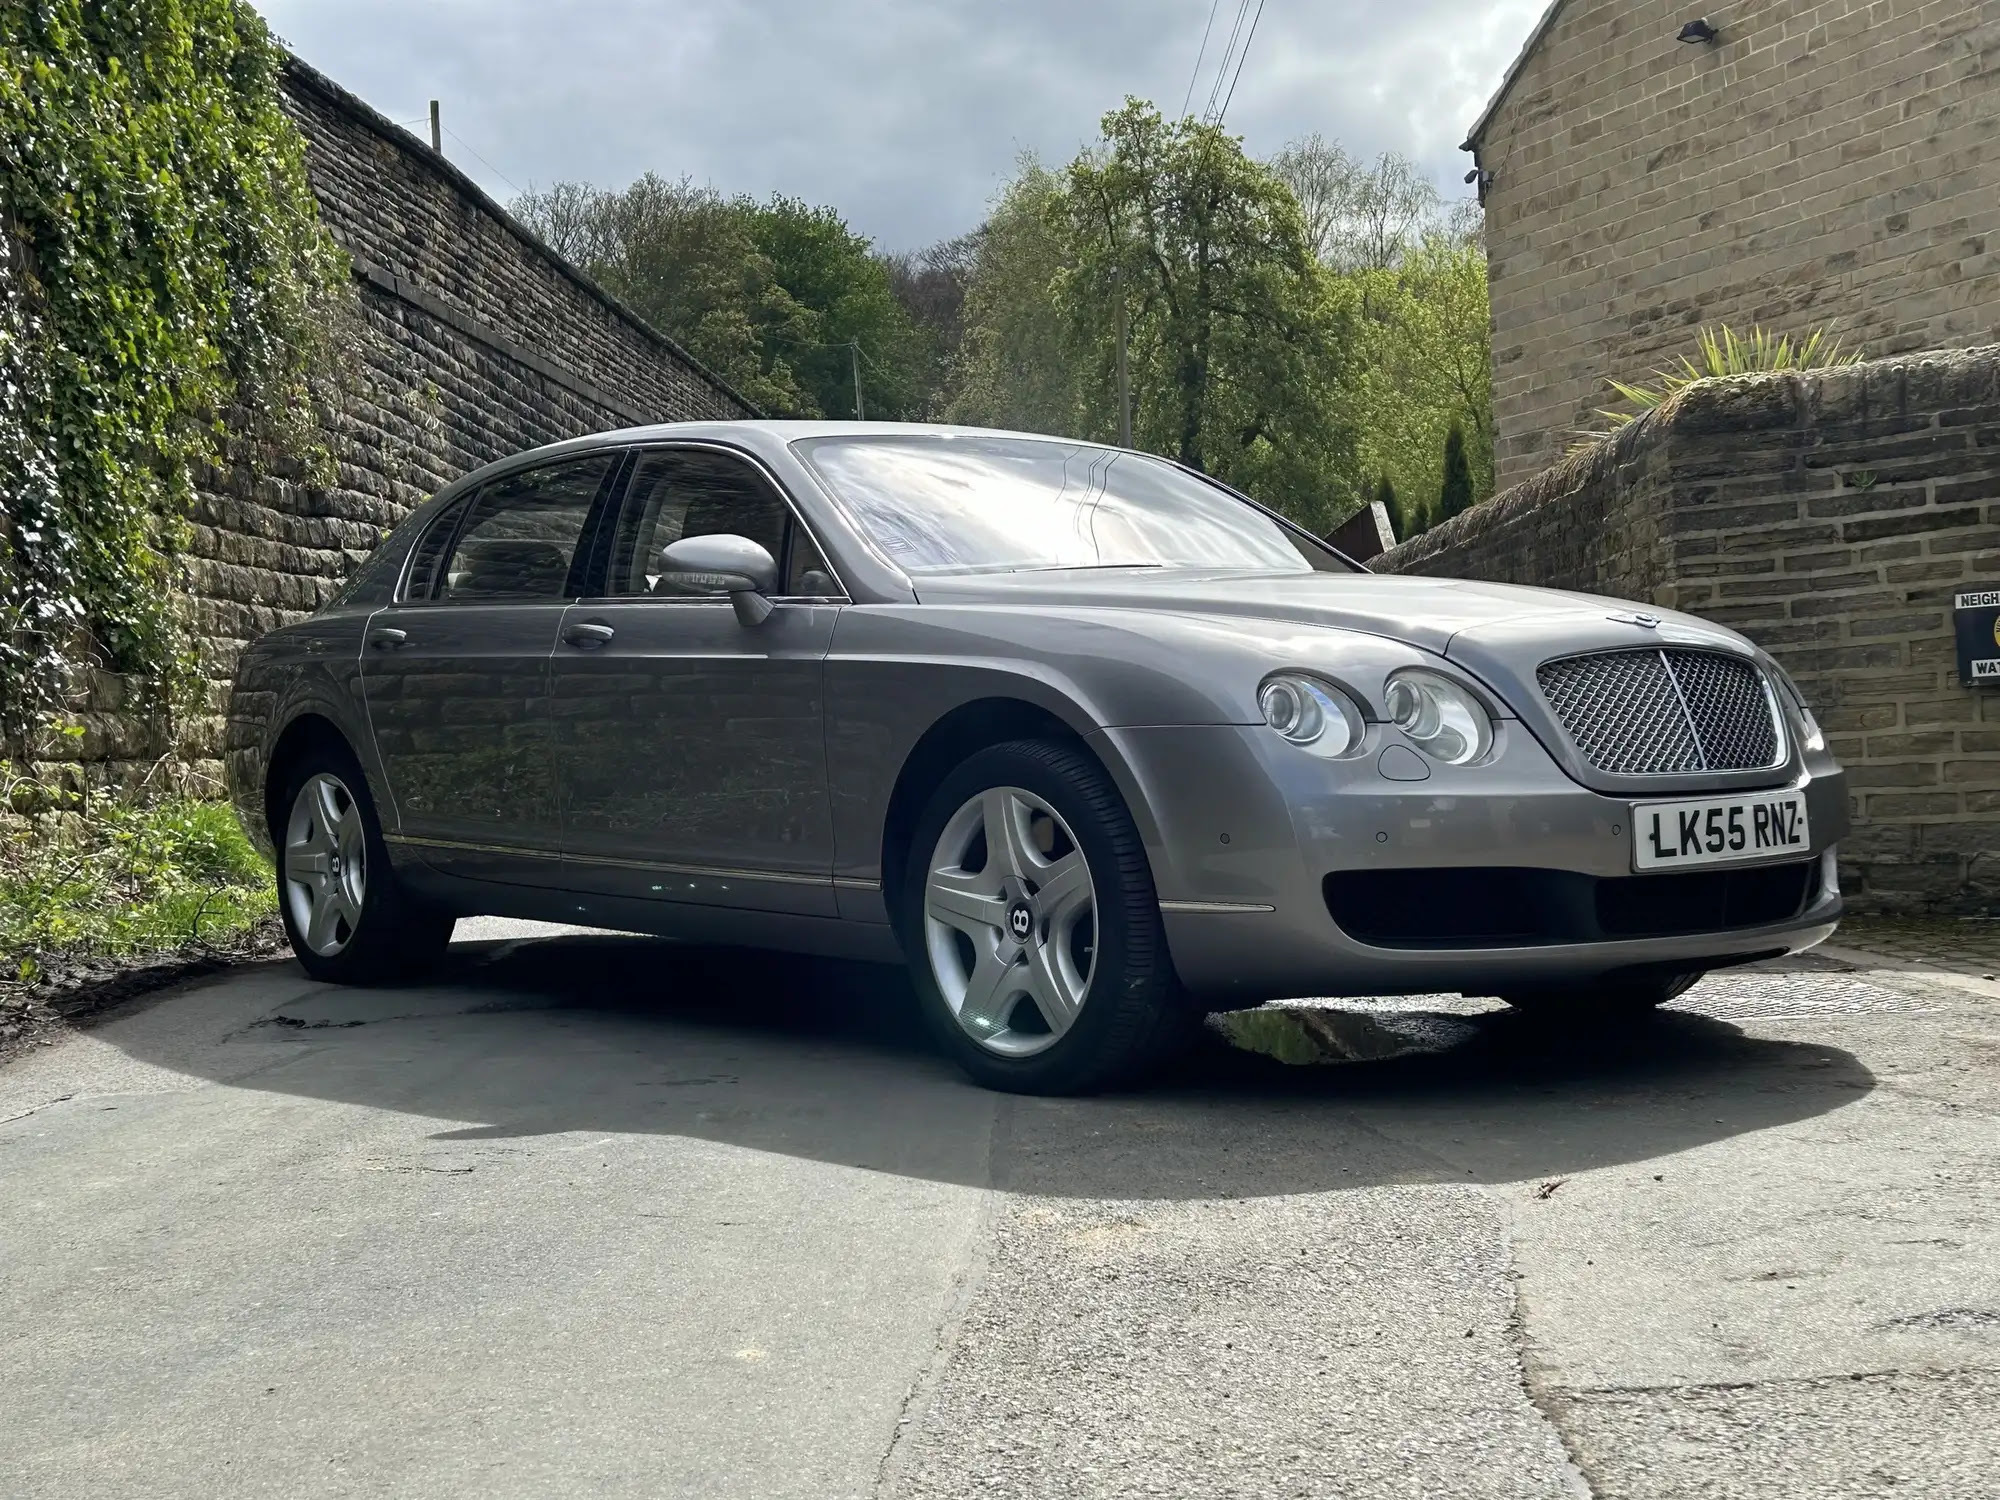 A 2005 Bentley Flying Spur which is expected to get £14,000 – £18,000